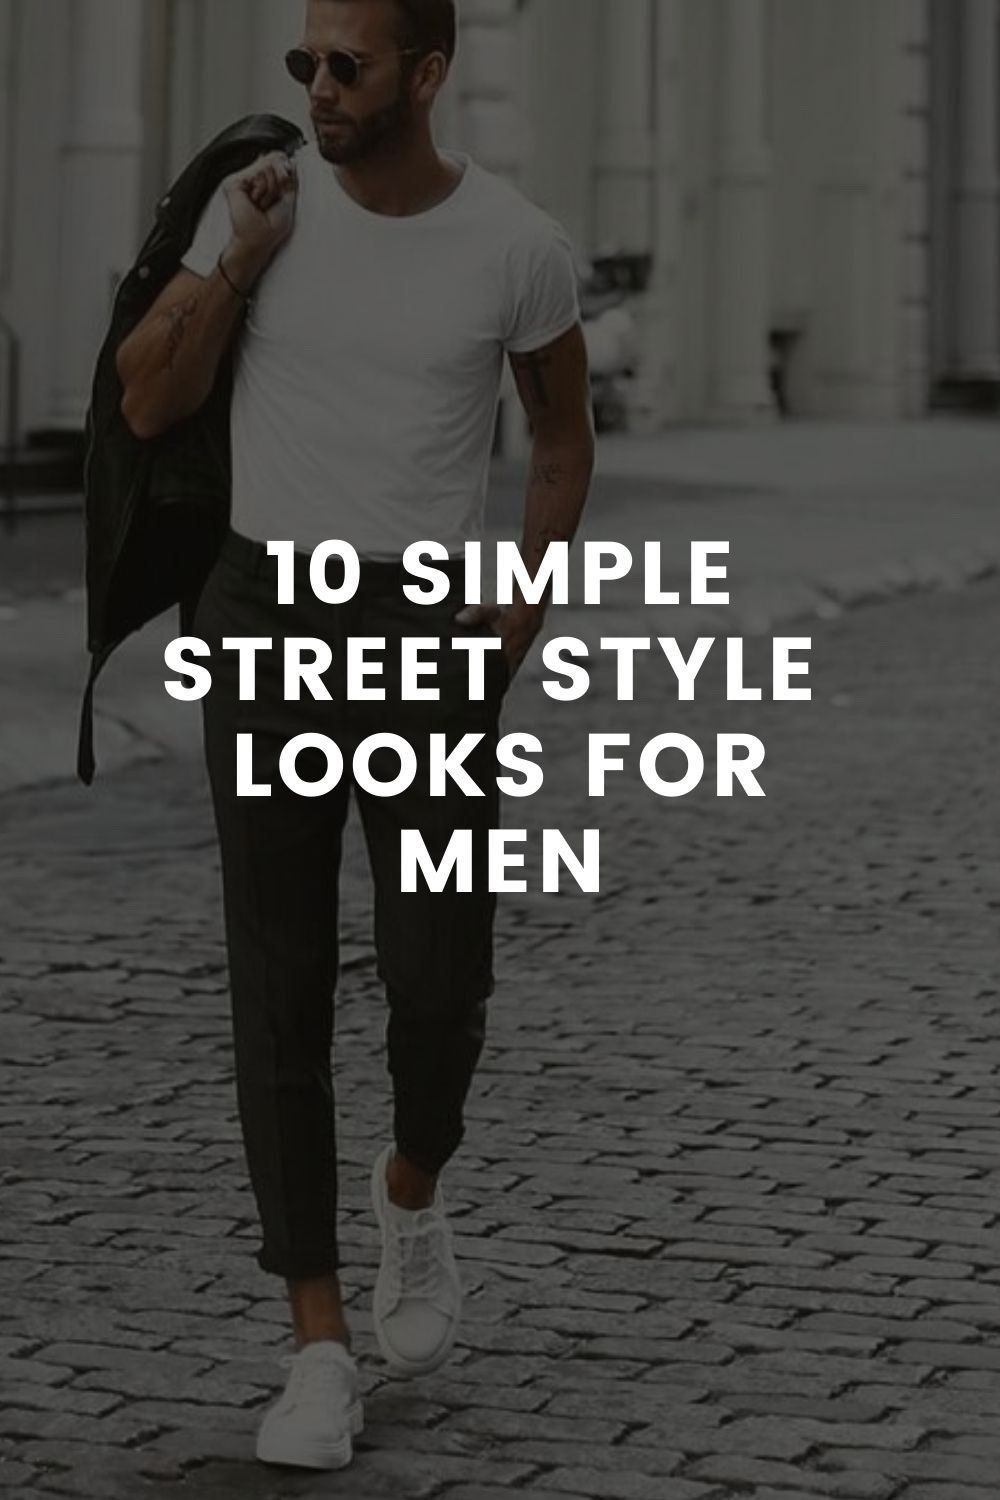 10 simple street style looks for men